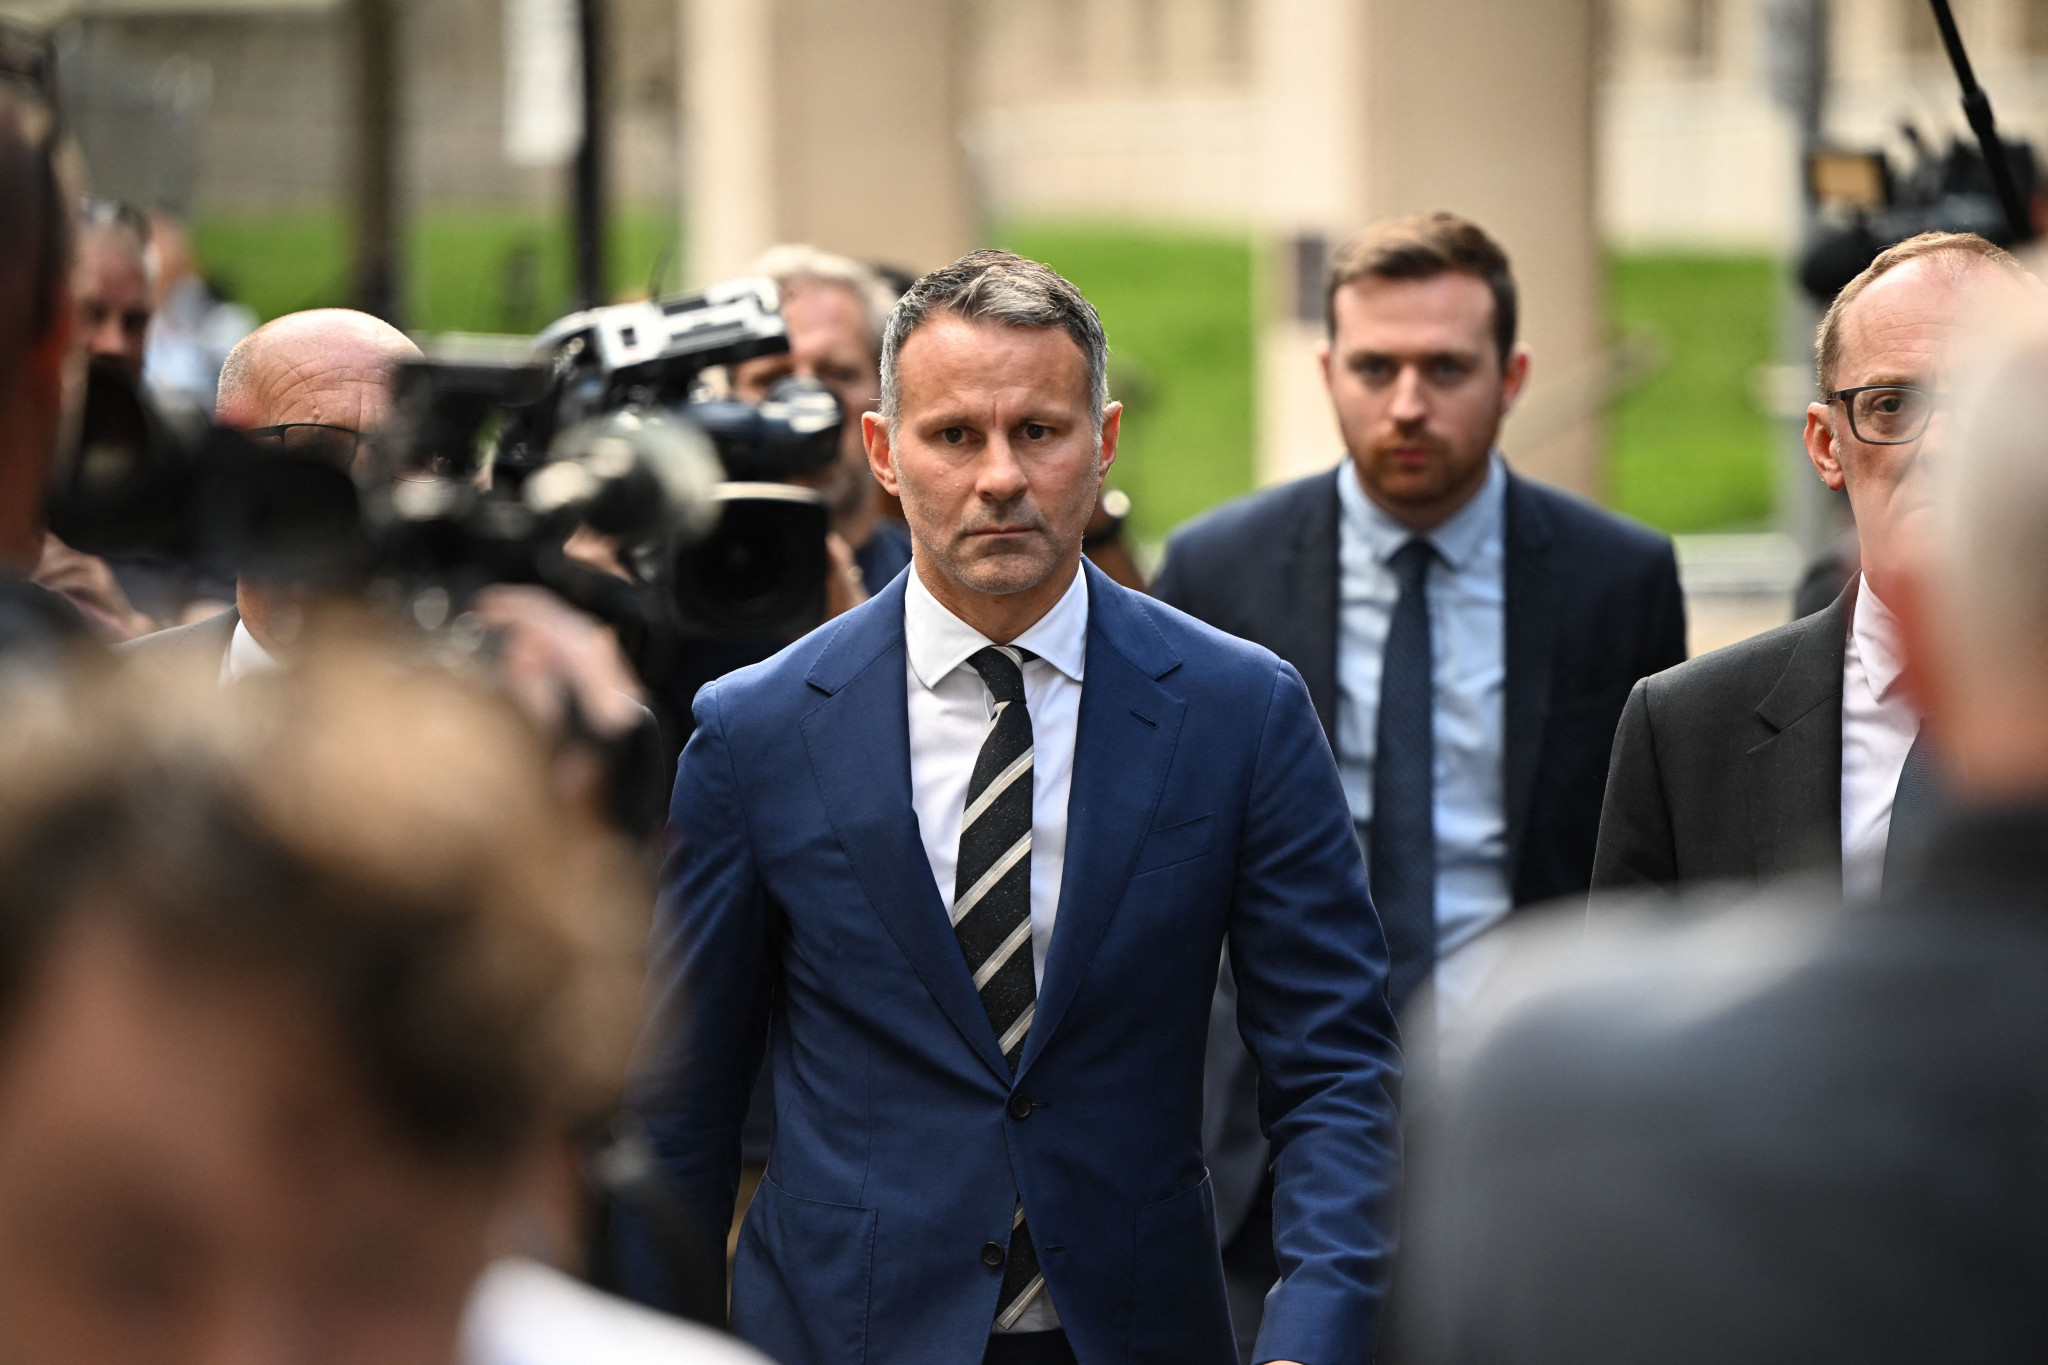 The jury in Ryan Giggs' trial could not find a verdict on any of the three charges ©Getty Images